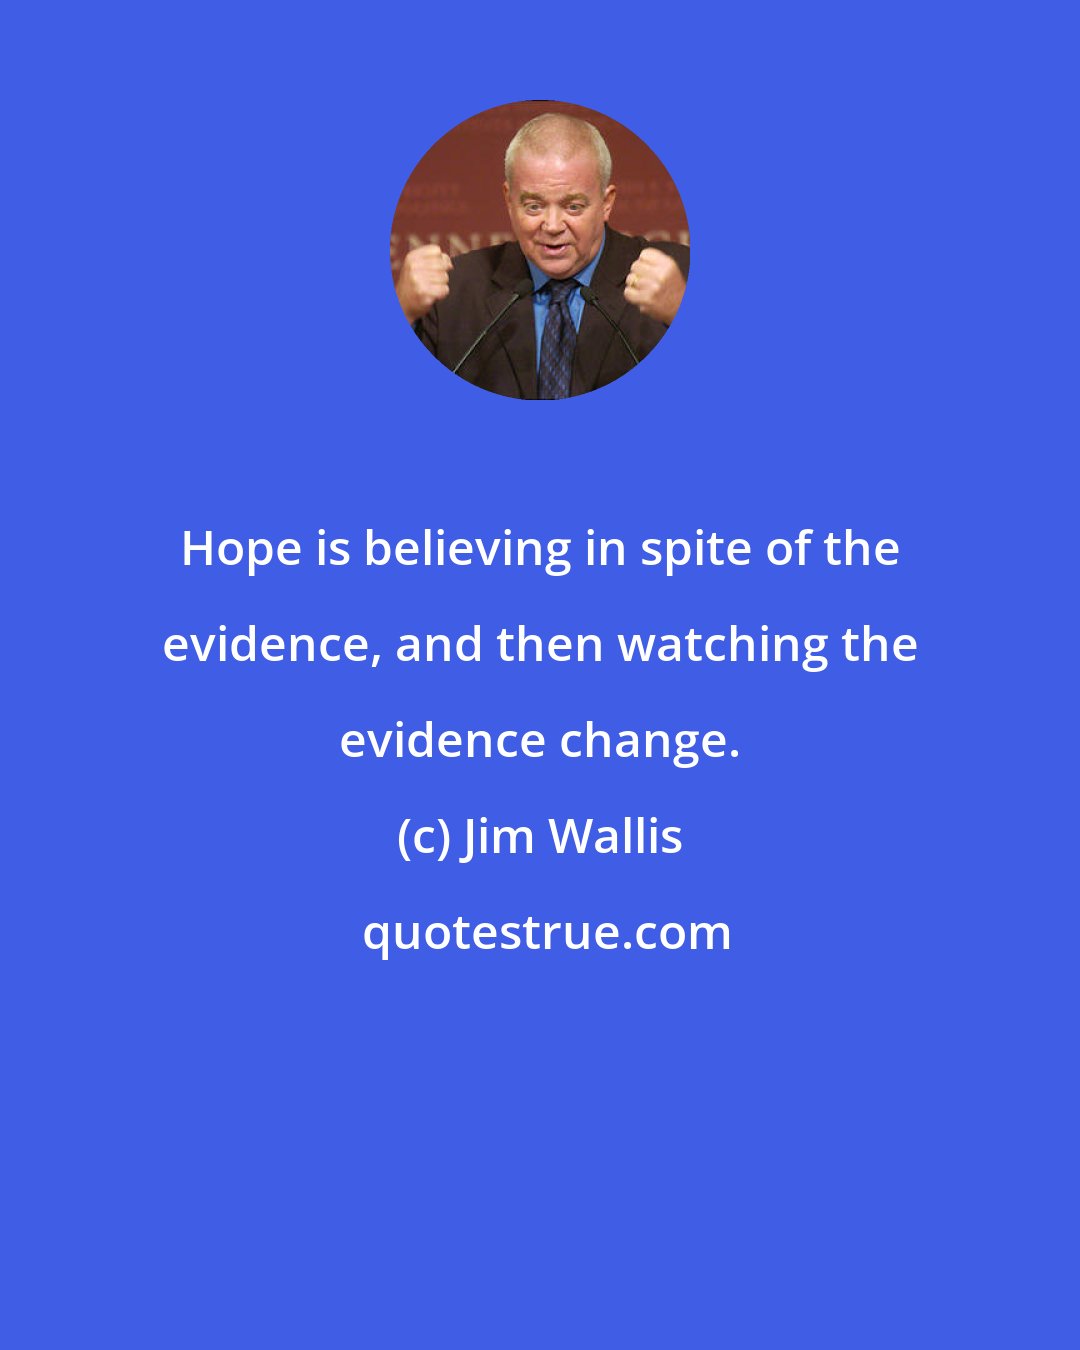 Jim Wallis: Hope is believing in spite of the evidence, and then watching the evidence change.